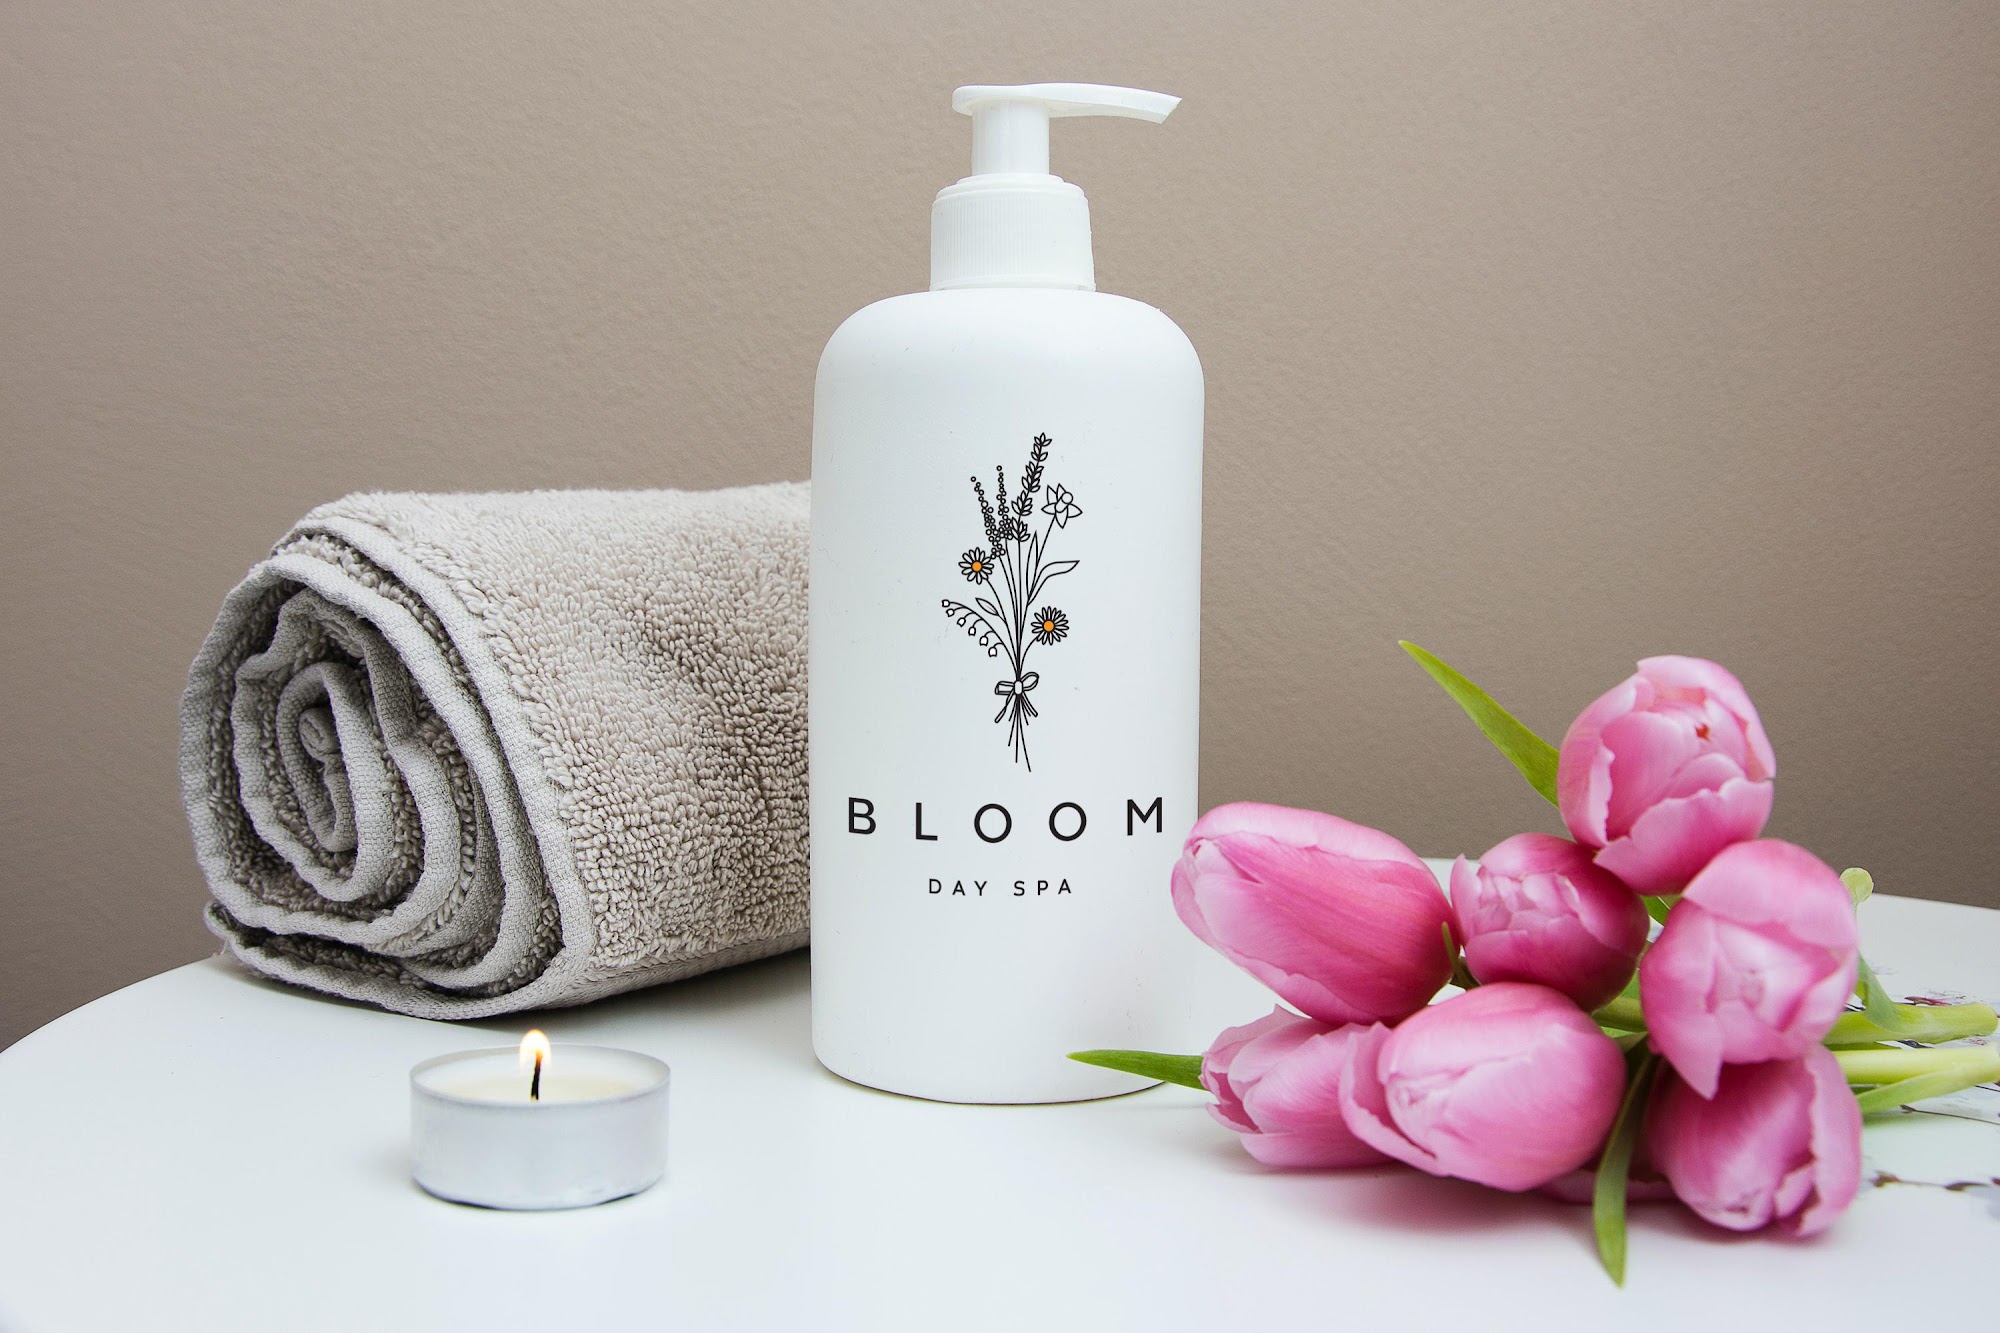 Bloom Day Spa